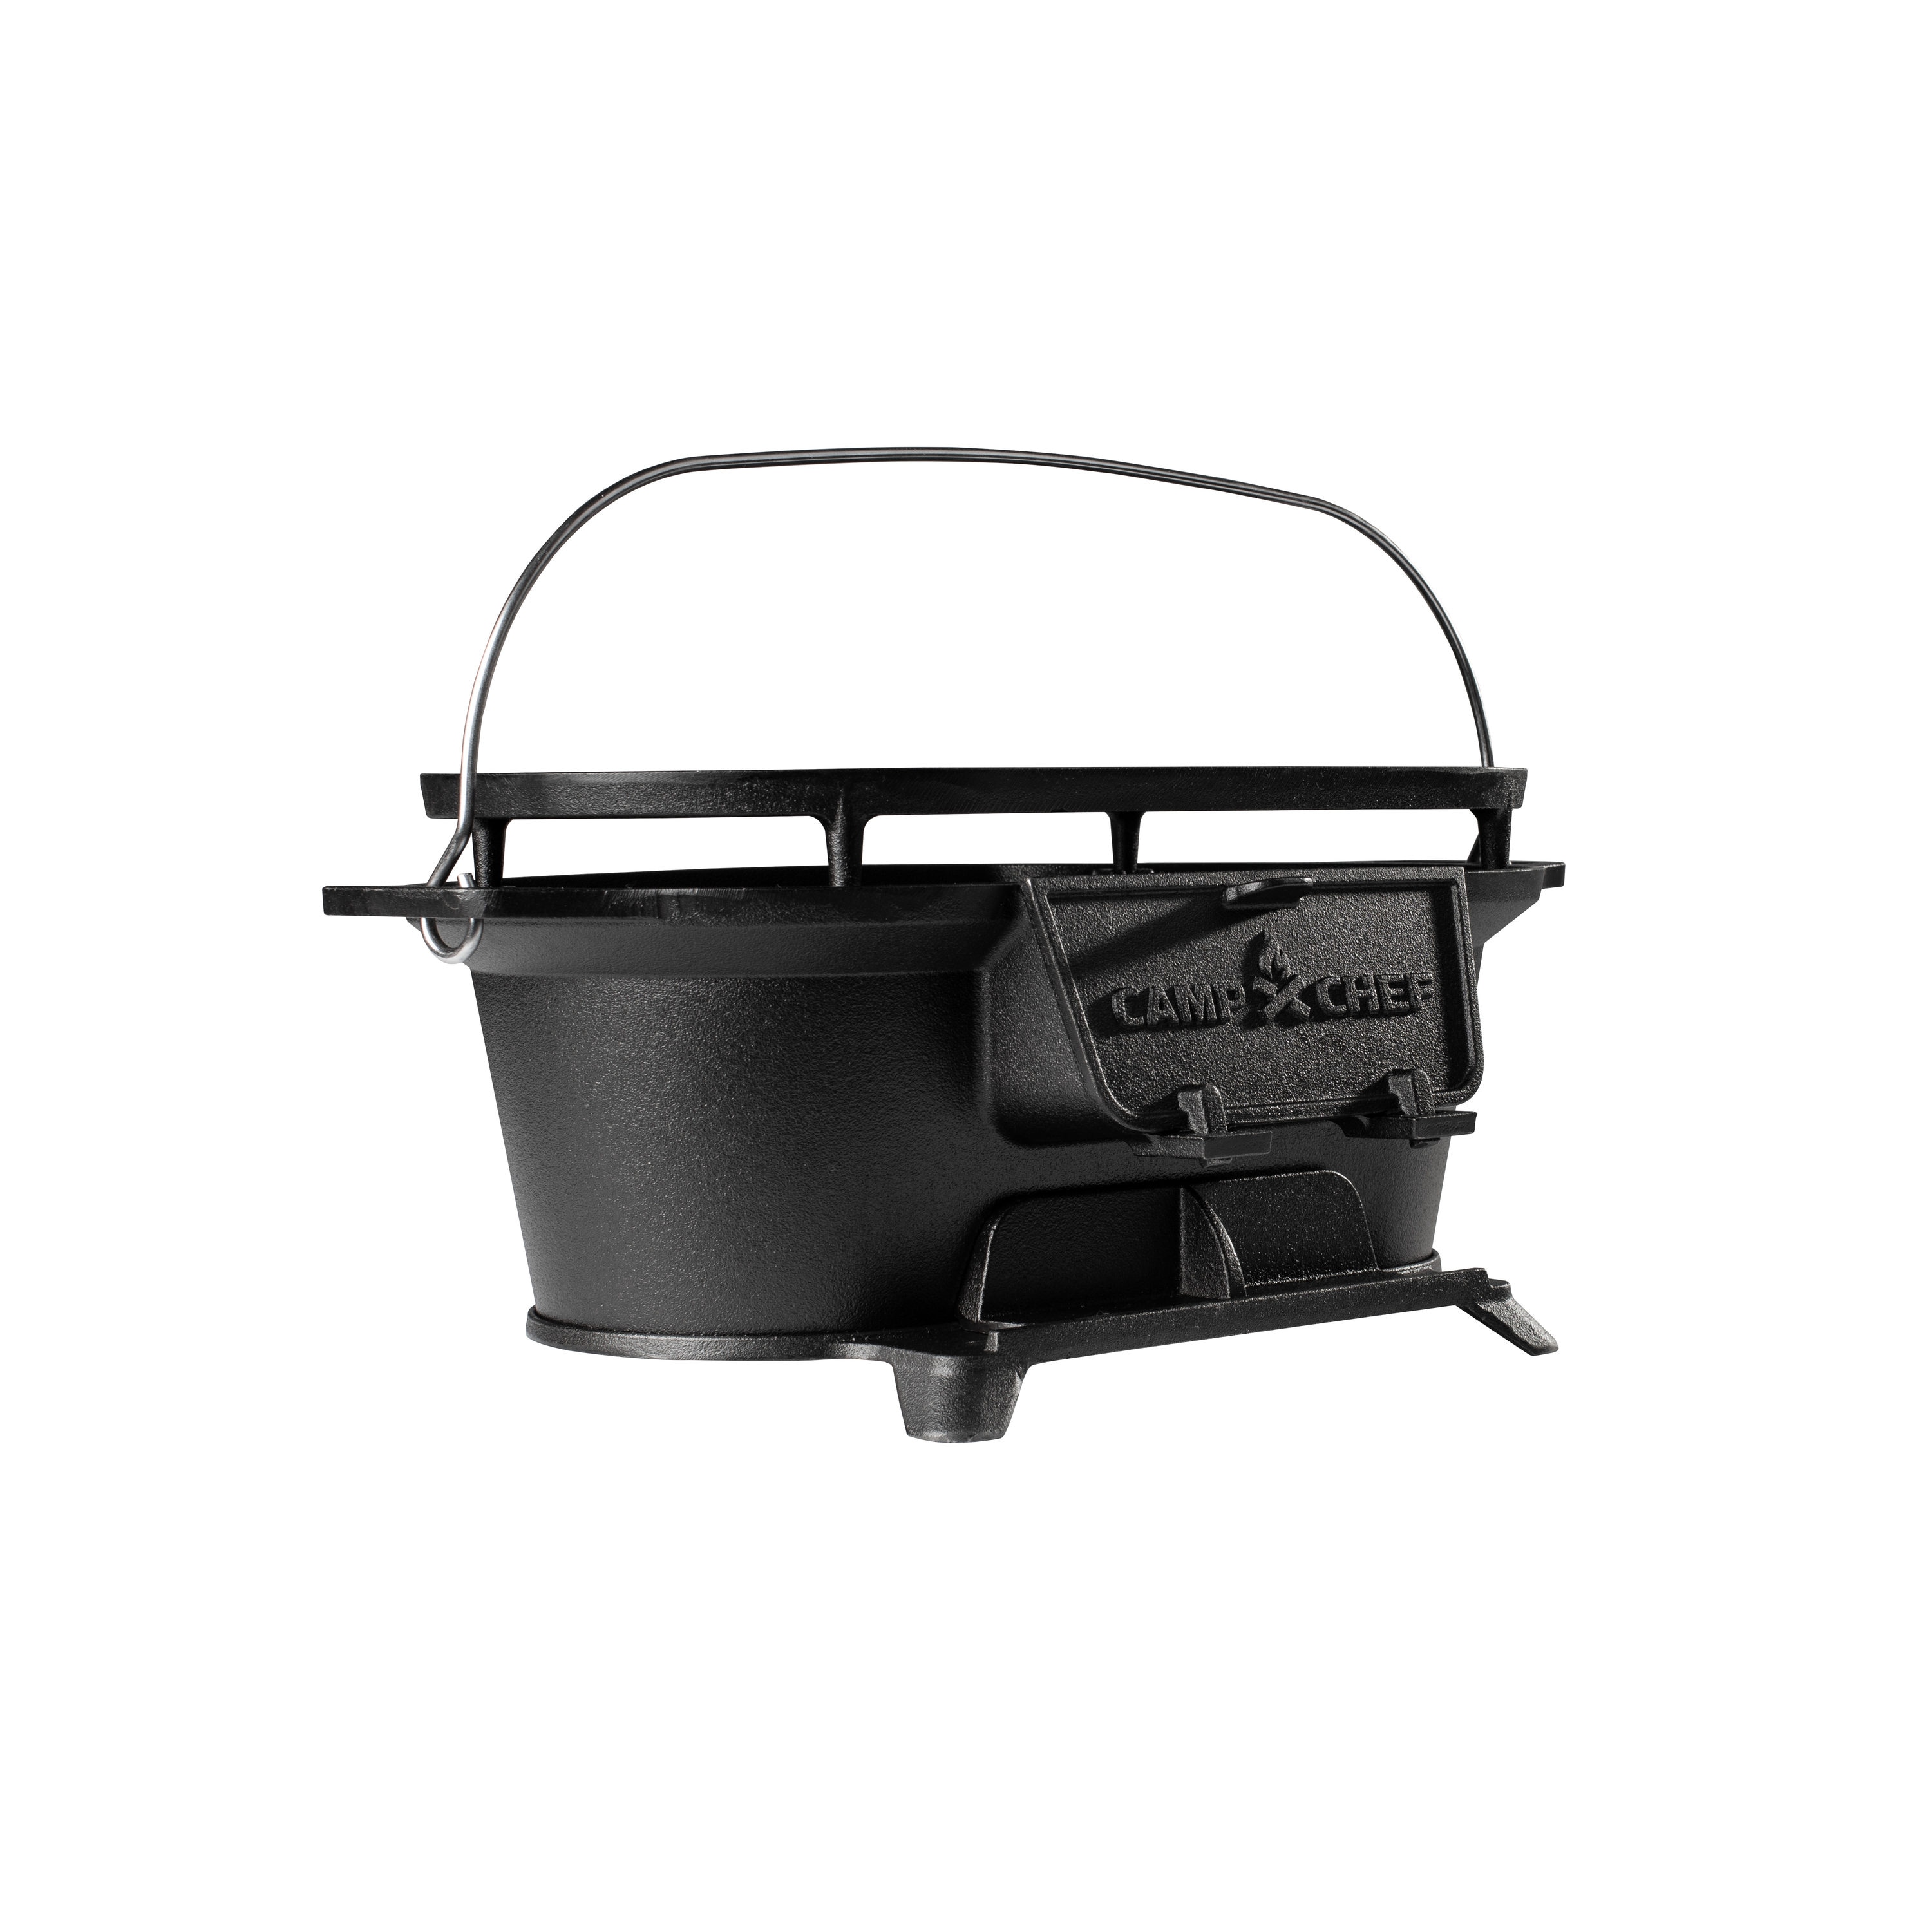 Cast Iron Grills & Outdoor Cooking at